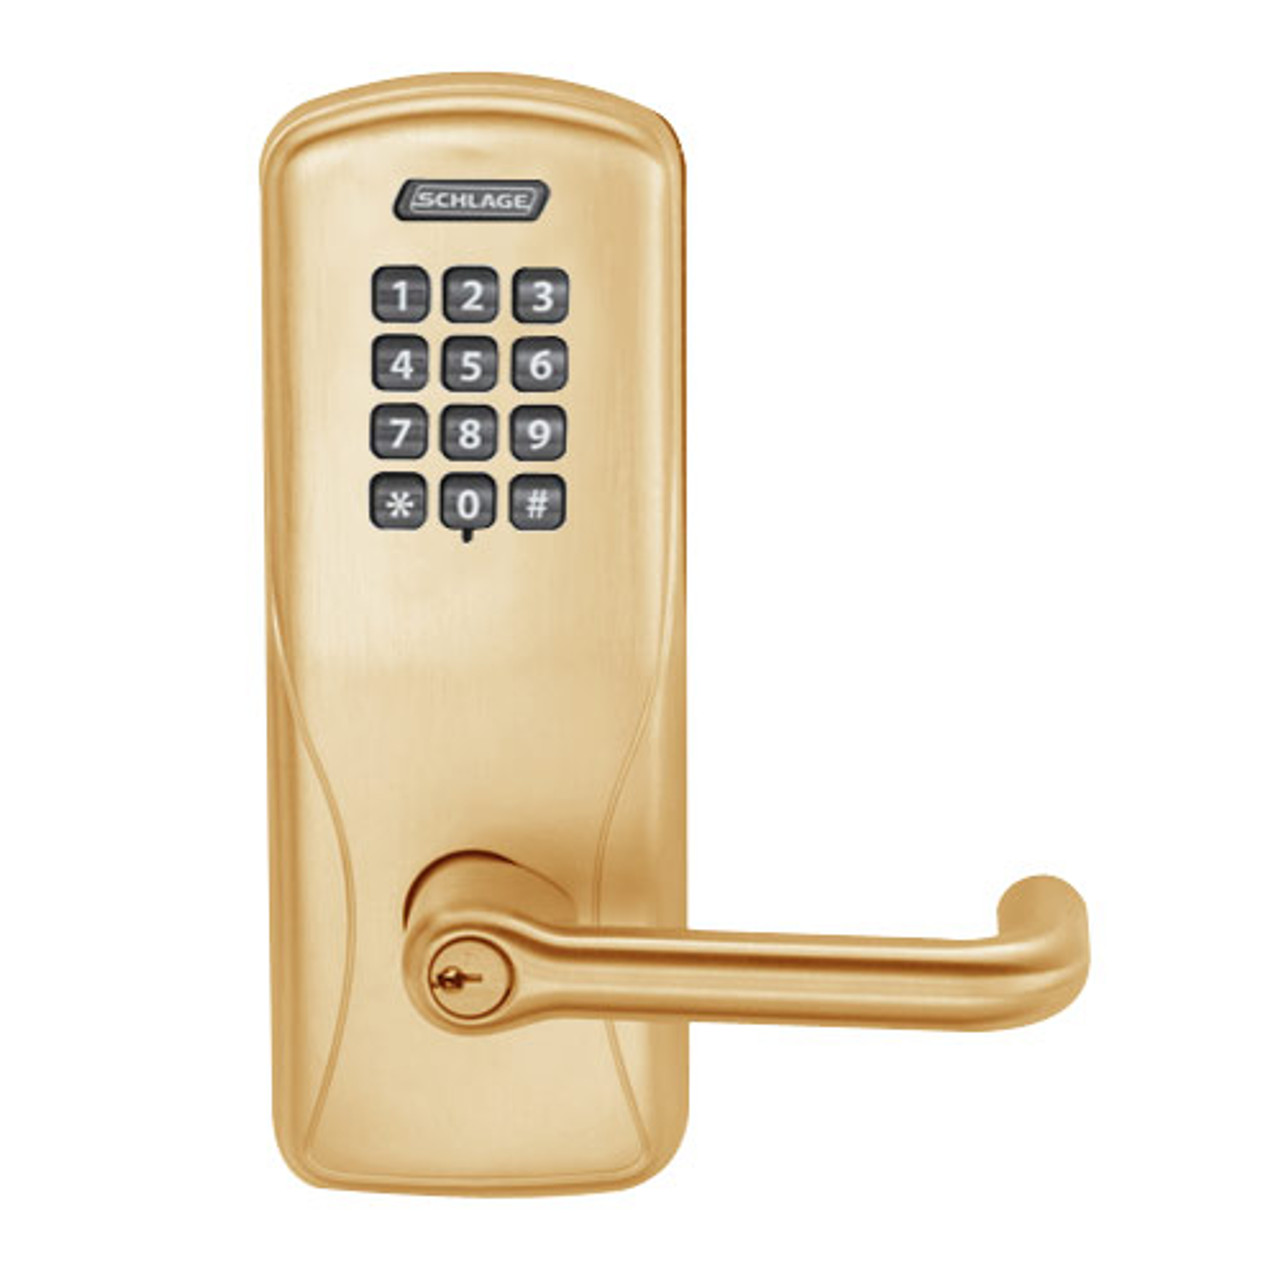 CO200-CY-70-KP-TLR-PD-612 Schlage Standalone Cylindrical Electronic Keypad locks in Satin Bronze